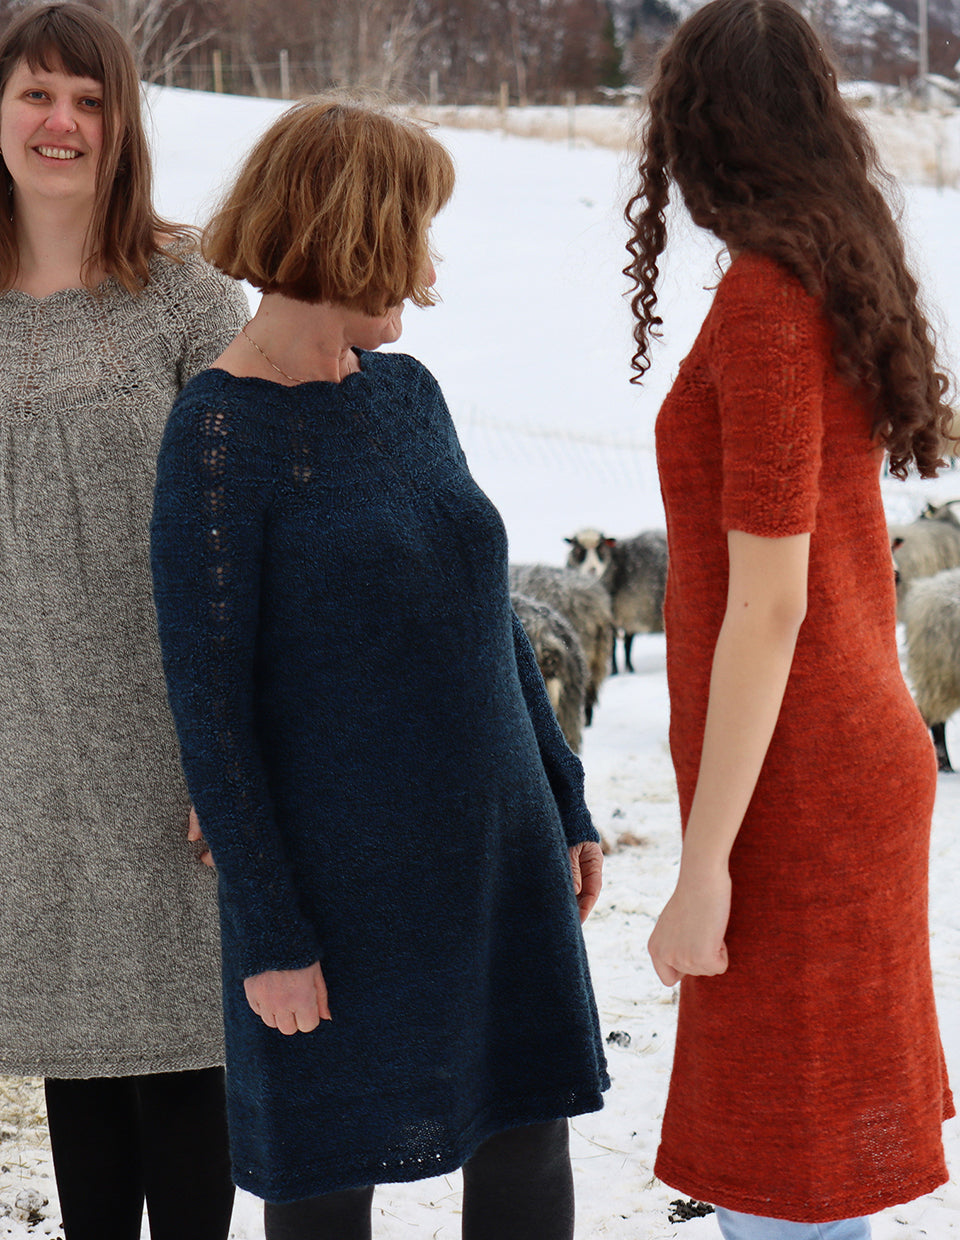 Woolen dress with waves, knitting kit